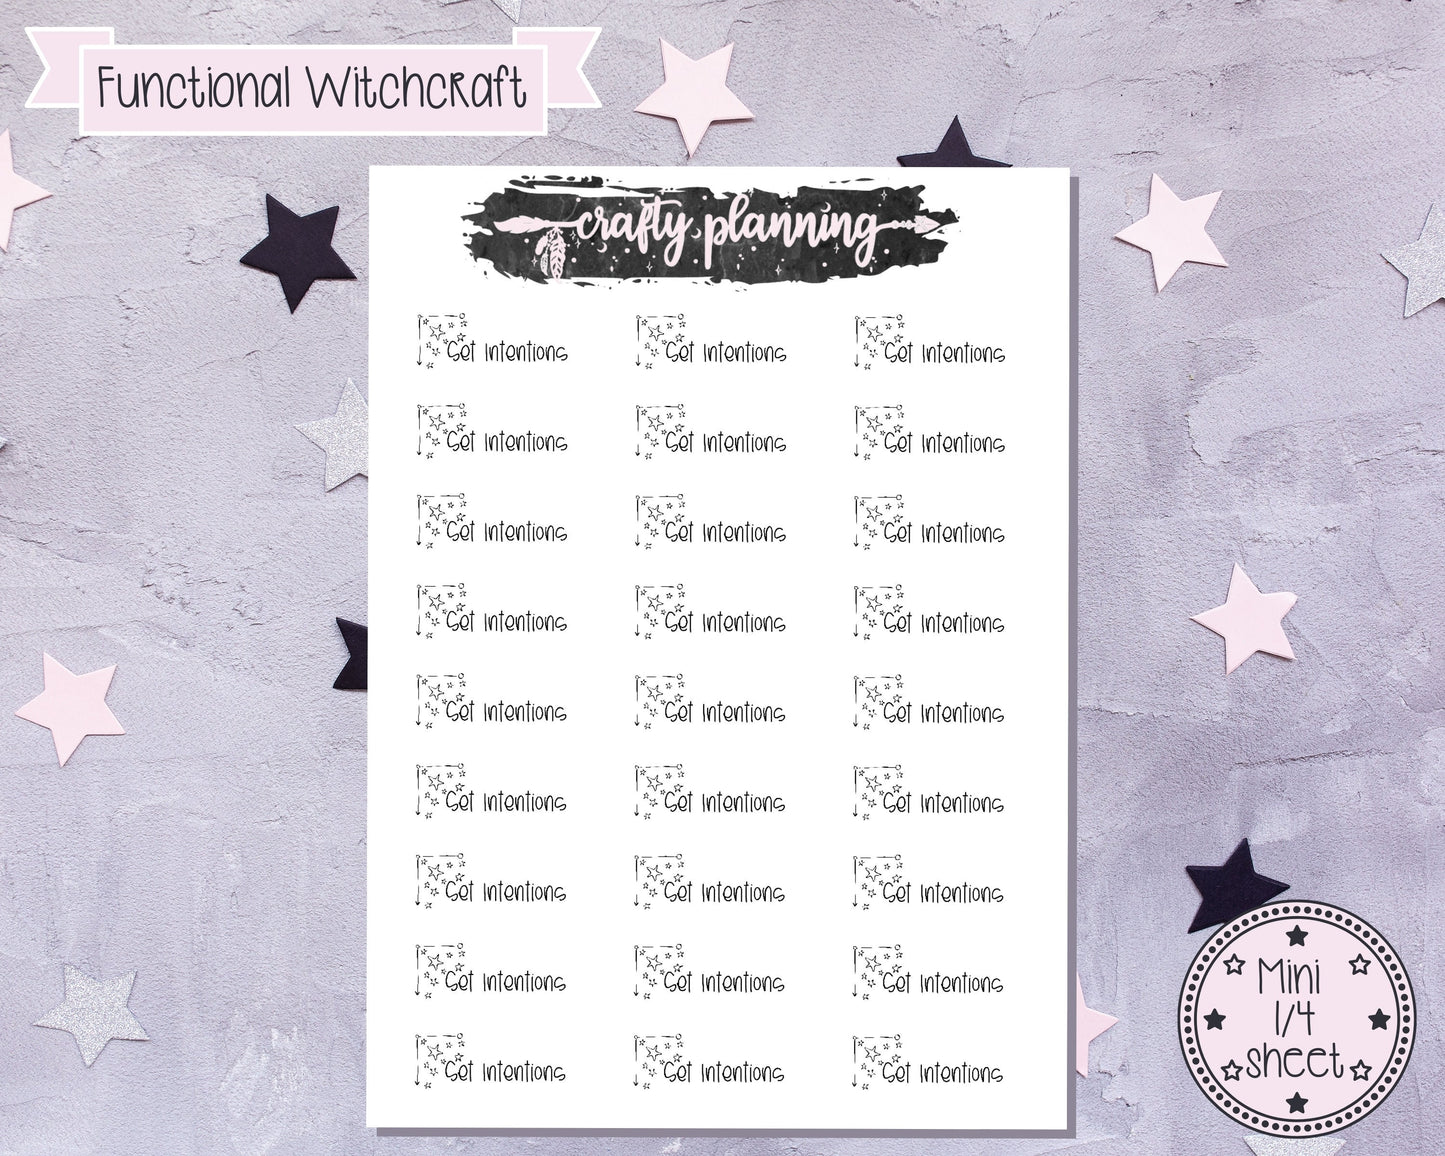 Witchcraft Stickers, Pagan Stickers, Wicca Stickers, Witch Planner, Esoteric Stickers, Book Of Shadows, Grimoire Stickers, Set Intentions